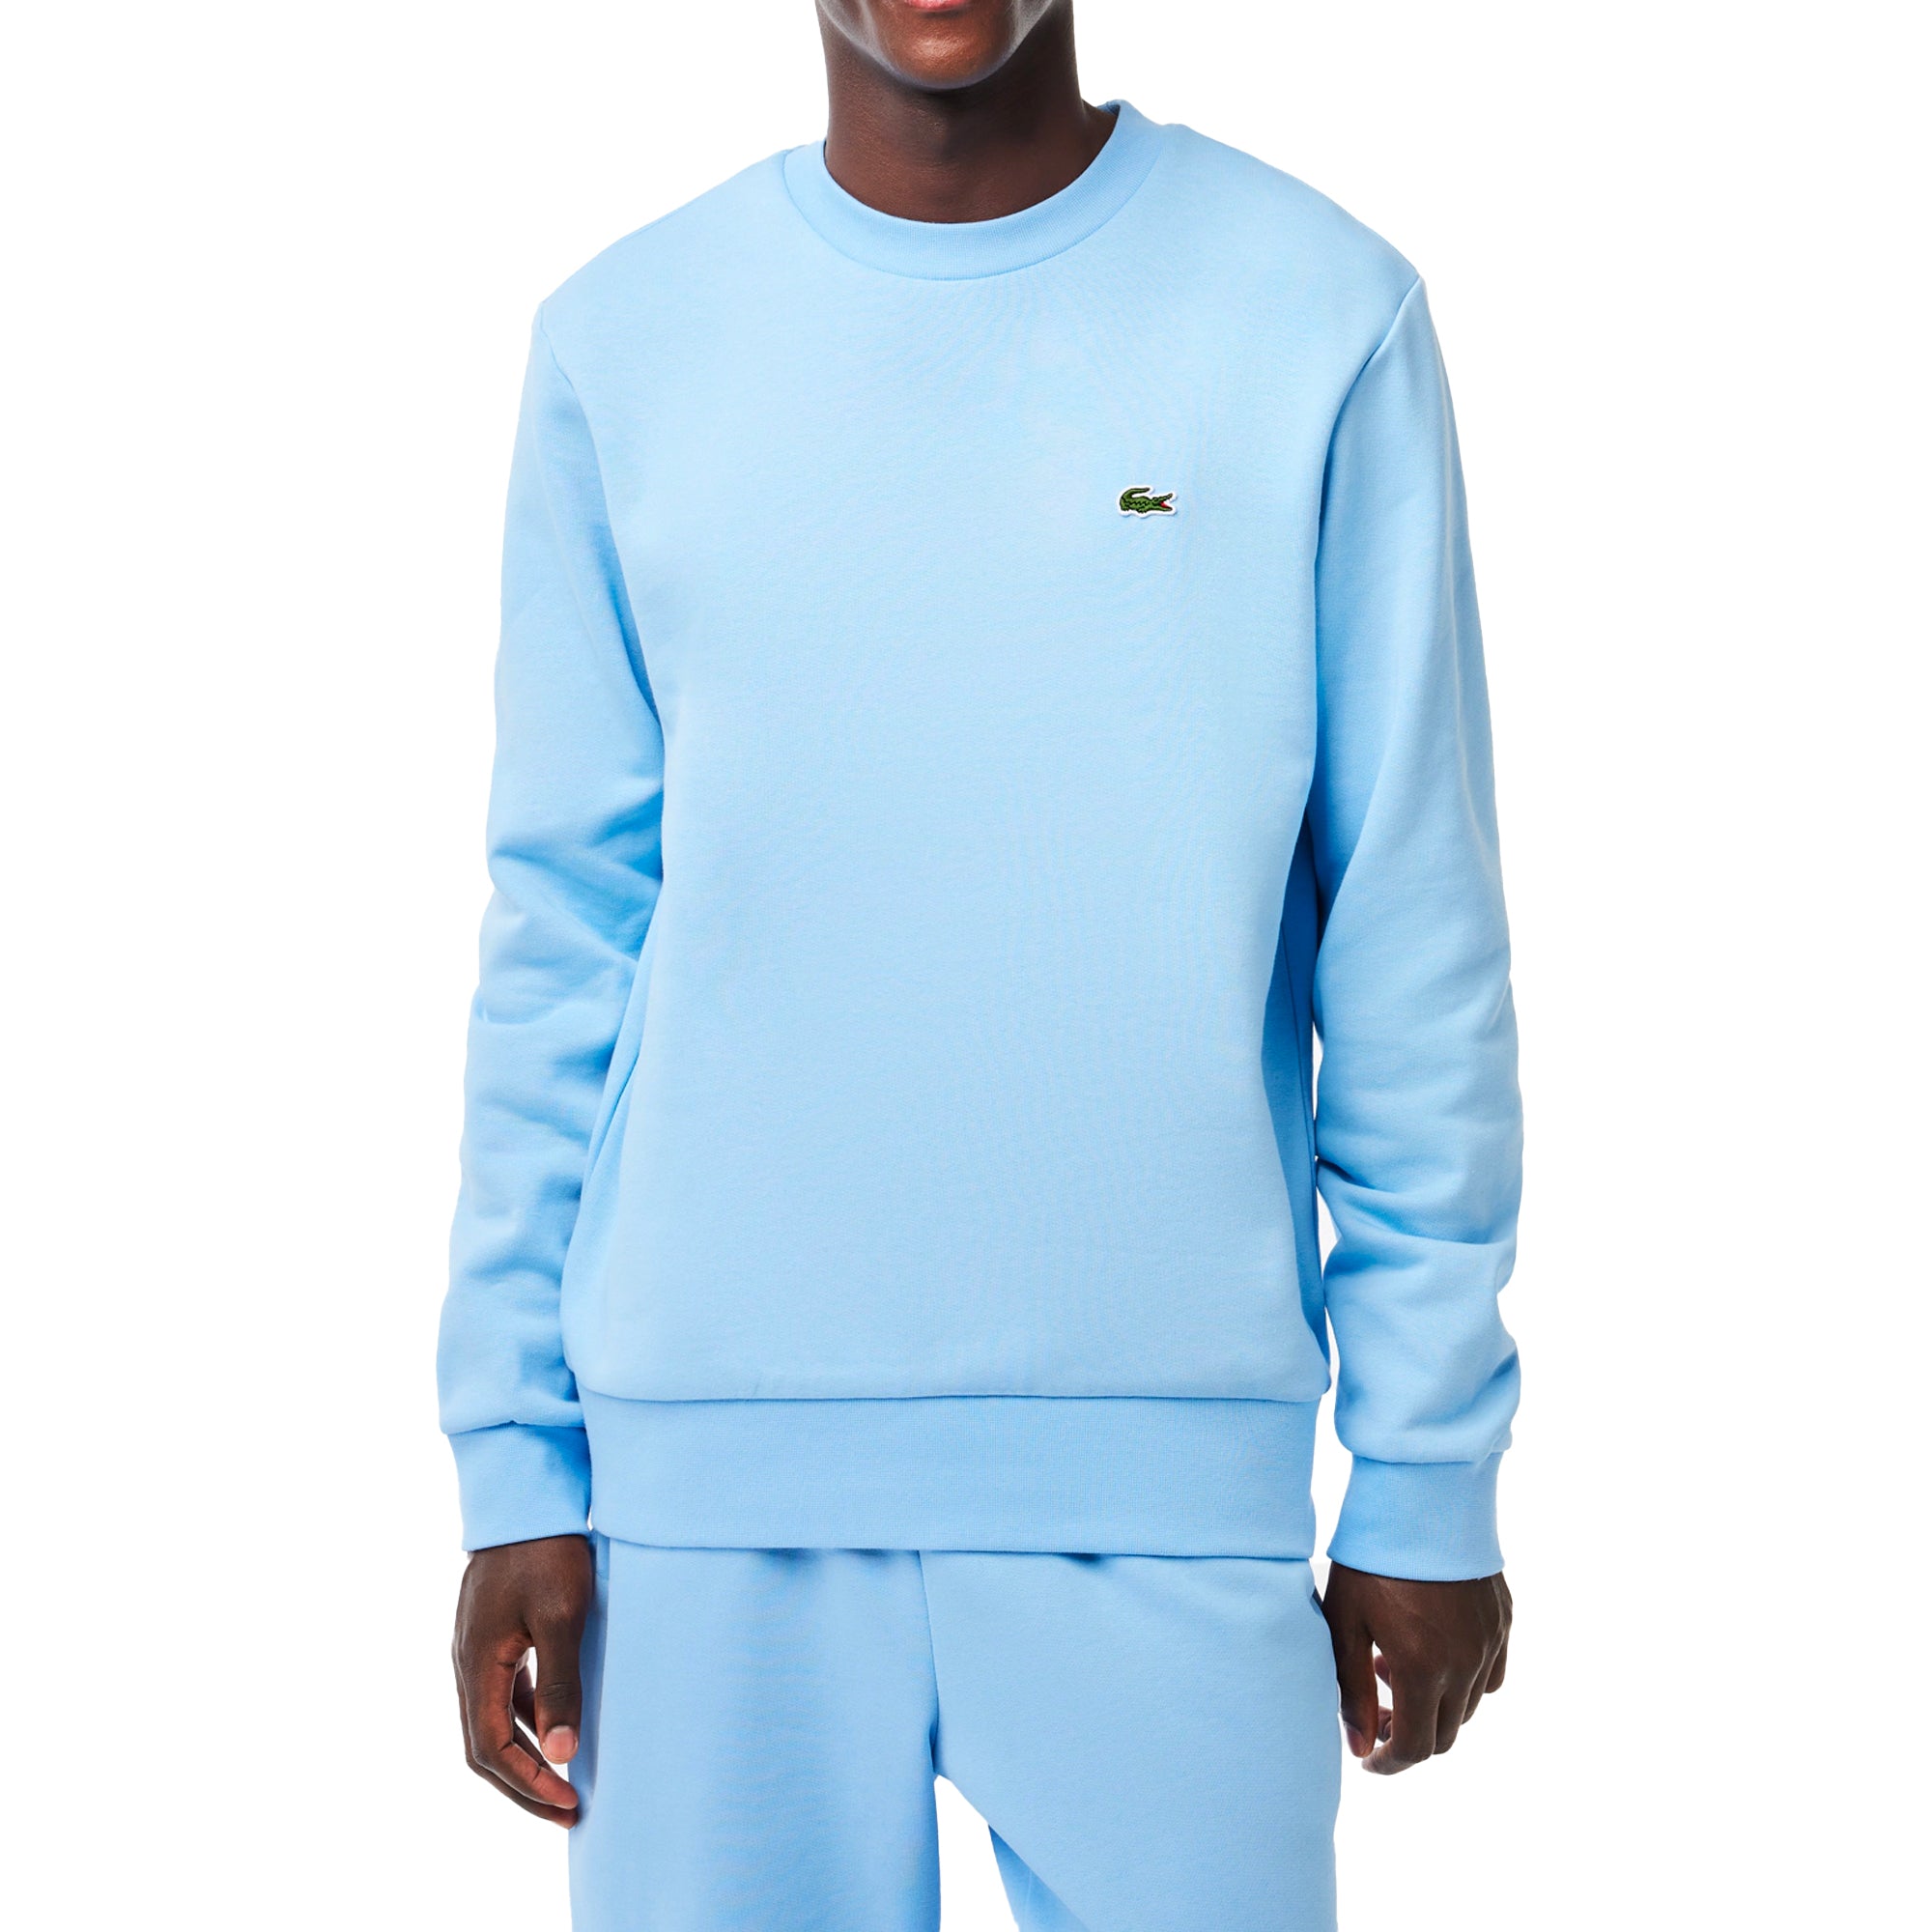 Lacoste Crew Sweat SH9608 - Overview Blue